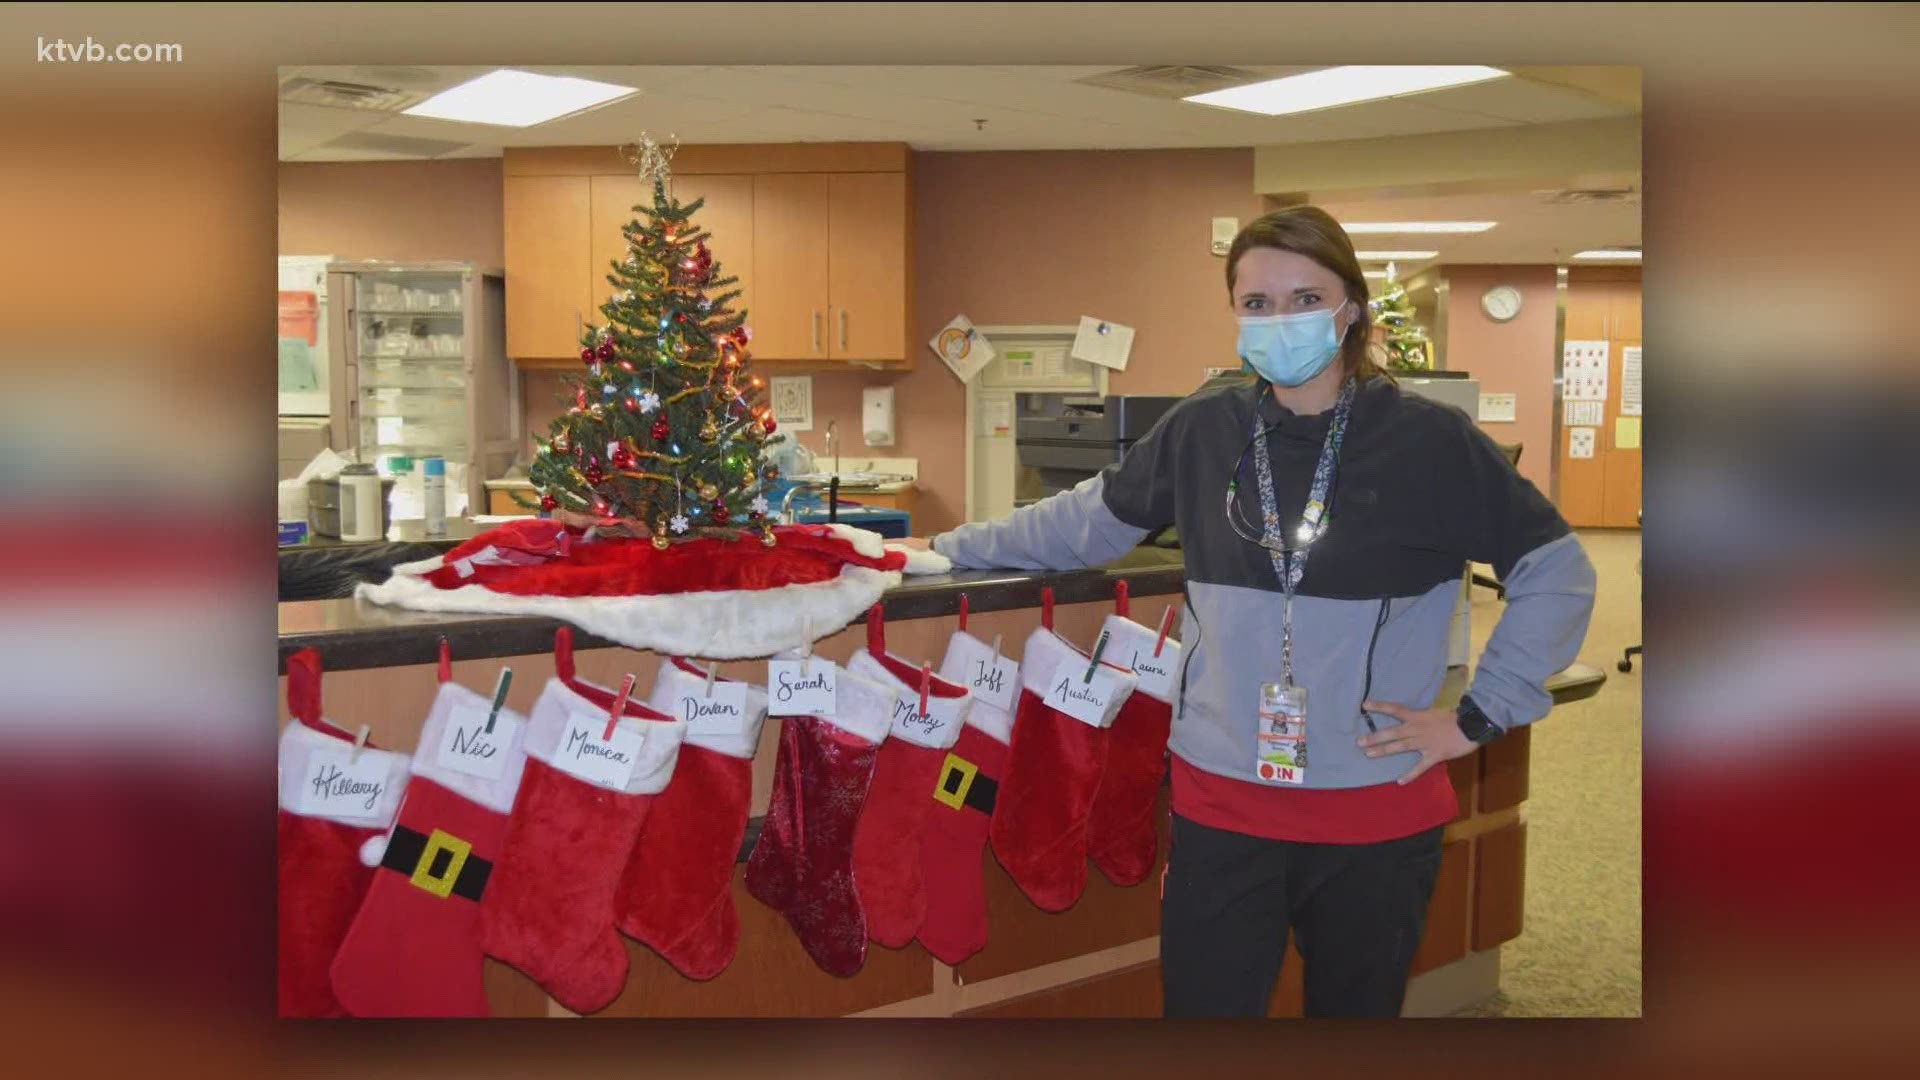 A nurse at St. Al's wanted to make sure her fellow healthcare workers felt appreciated this Christmas.